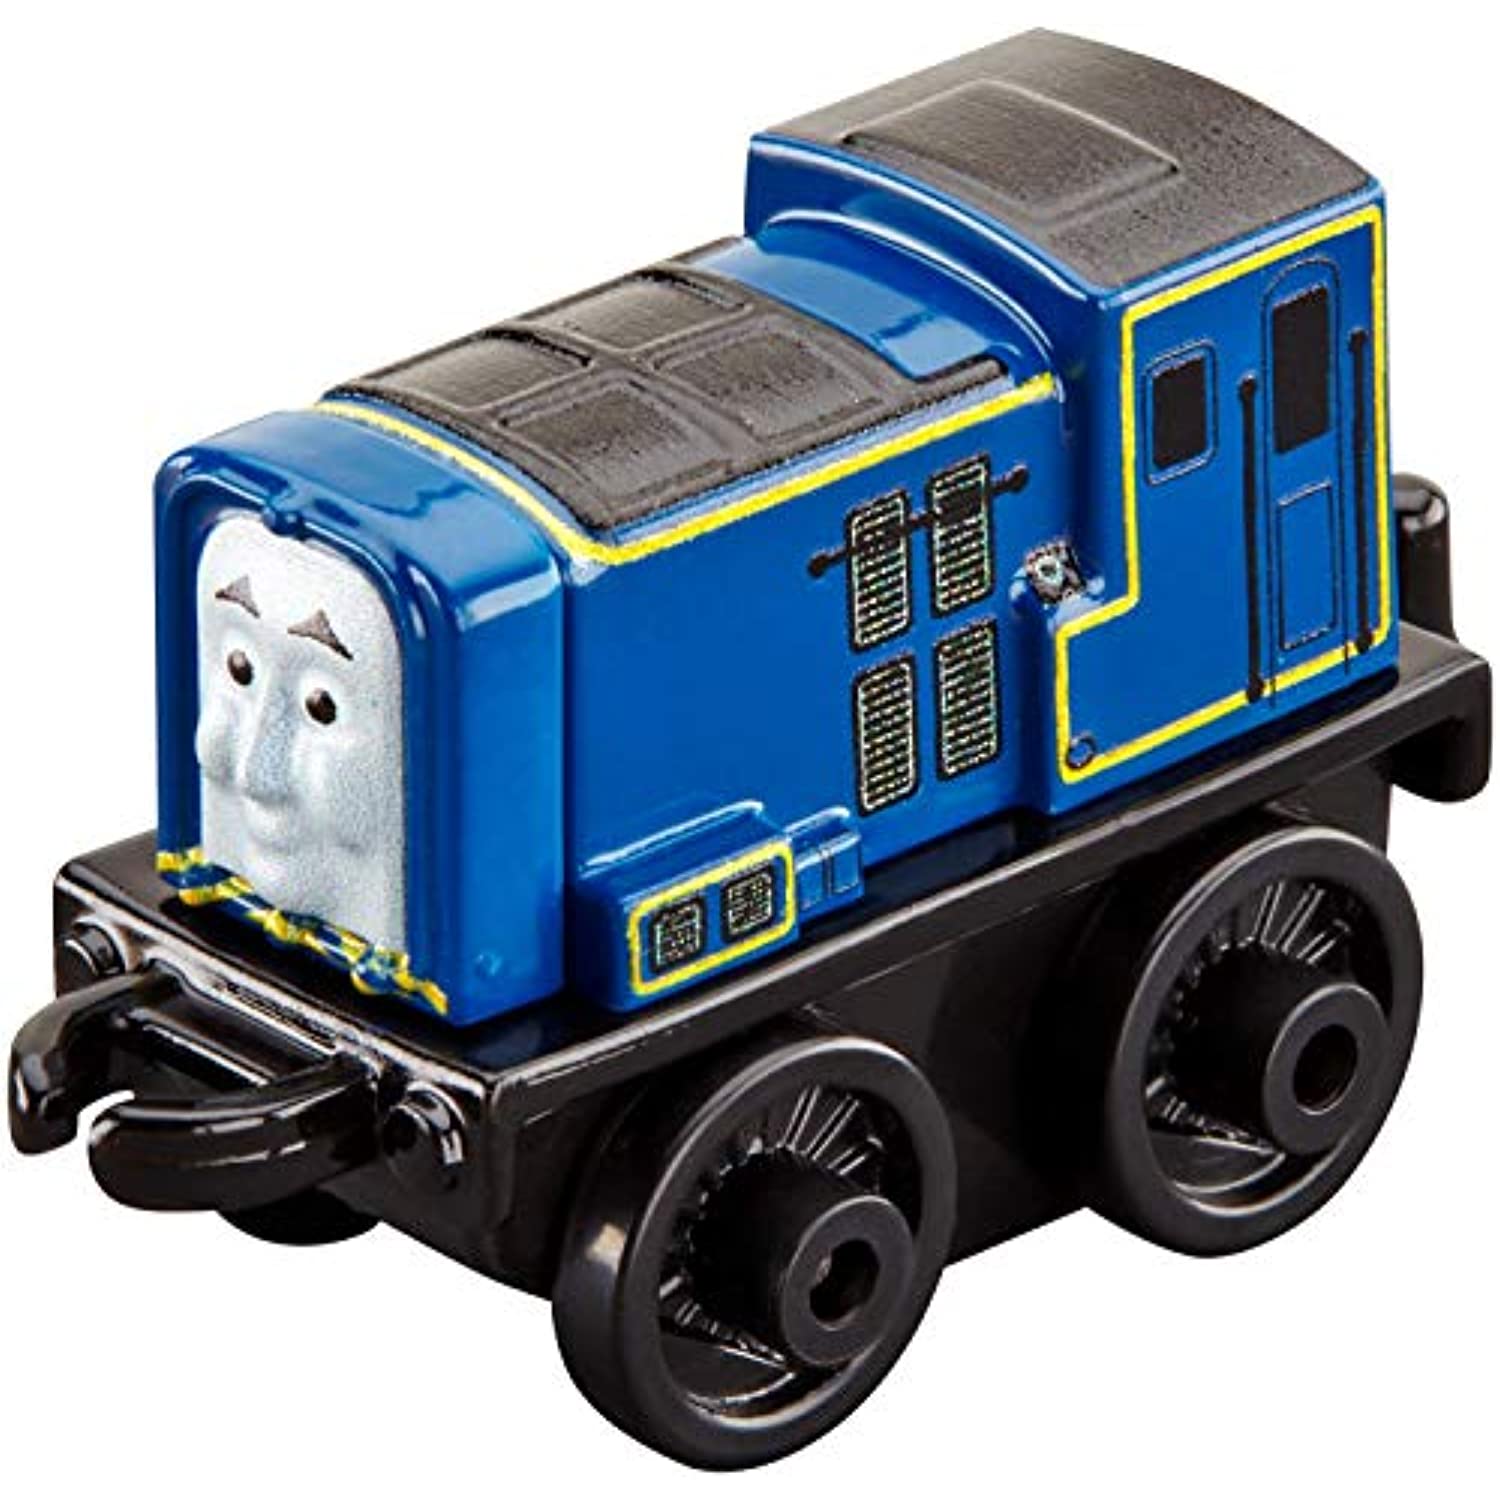 THOMAS & FRIENDS "MINIS" - Classics SIDNEY Collectible Figure